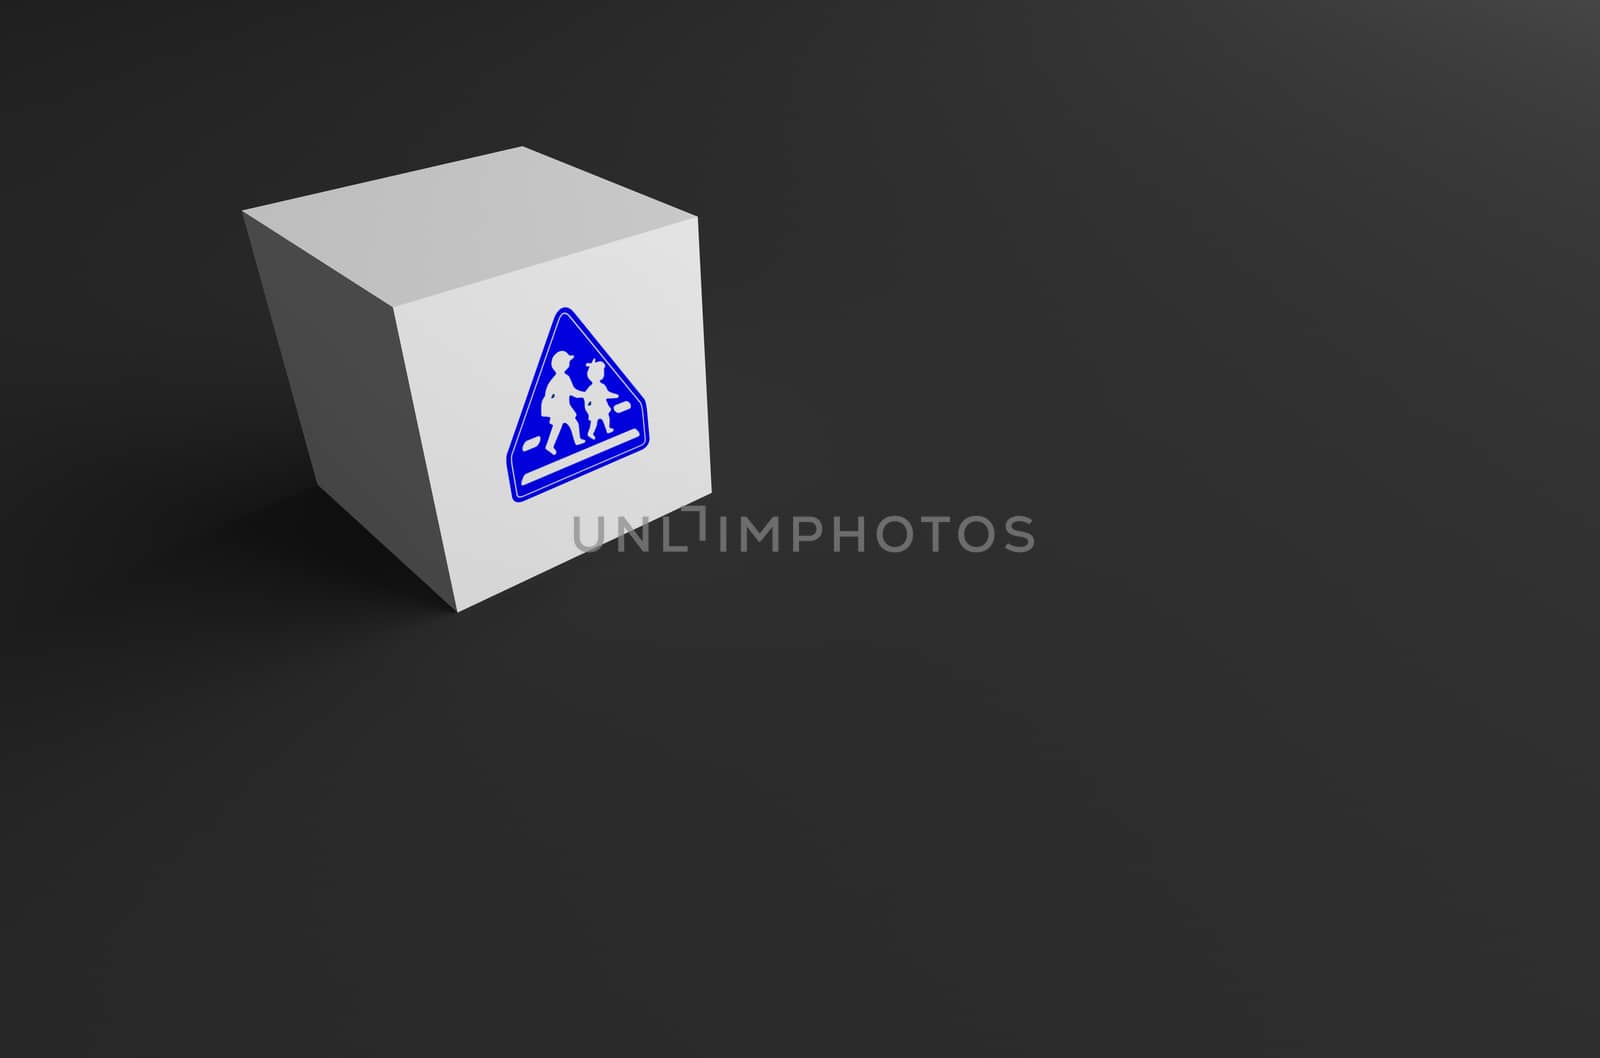 3D RENDERING OF ROAD SIGN ON WHITE CUBE WITH BLACK BACKGROUND